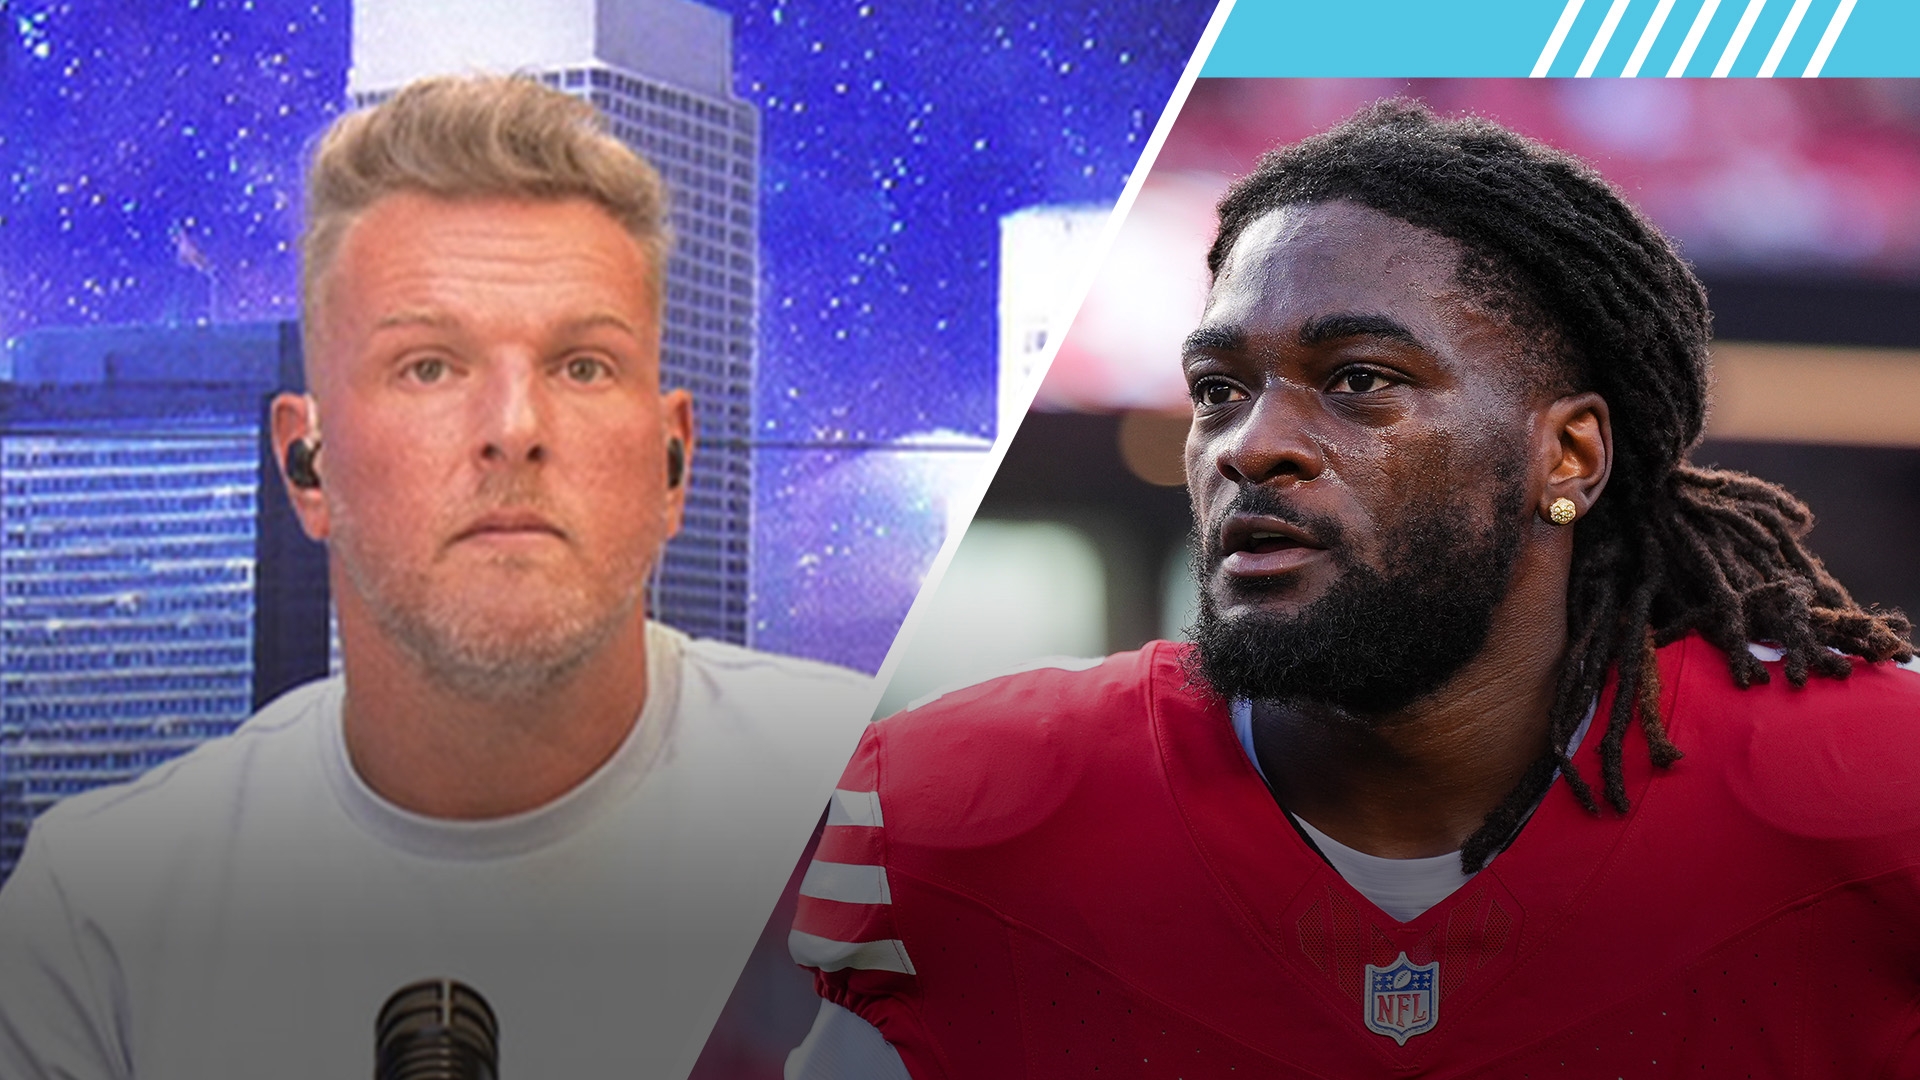 McAfee wonders what Aiyuk's video means for his NFL future